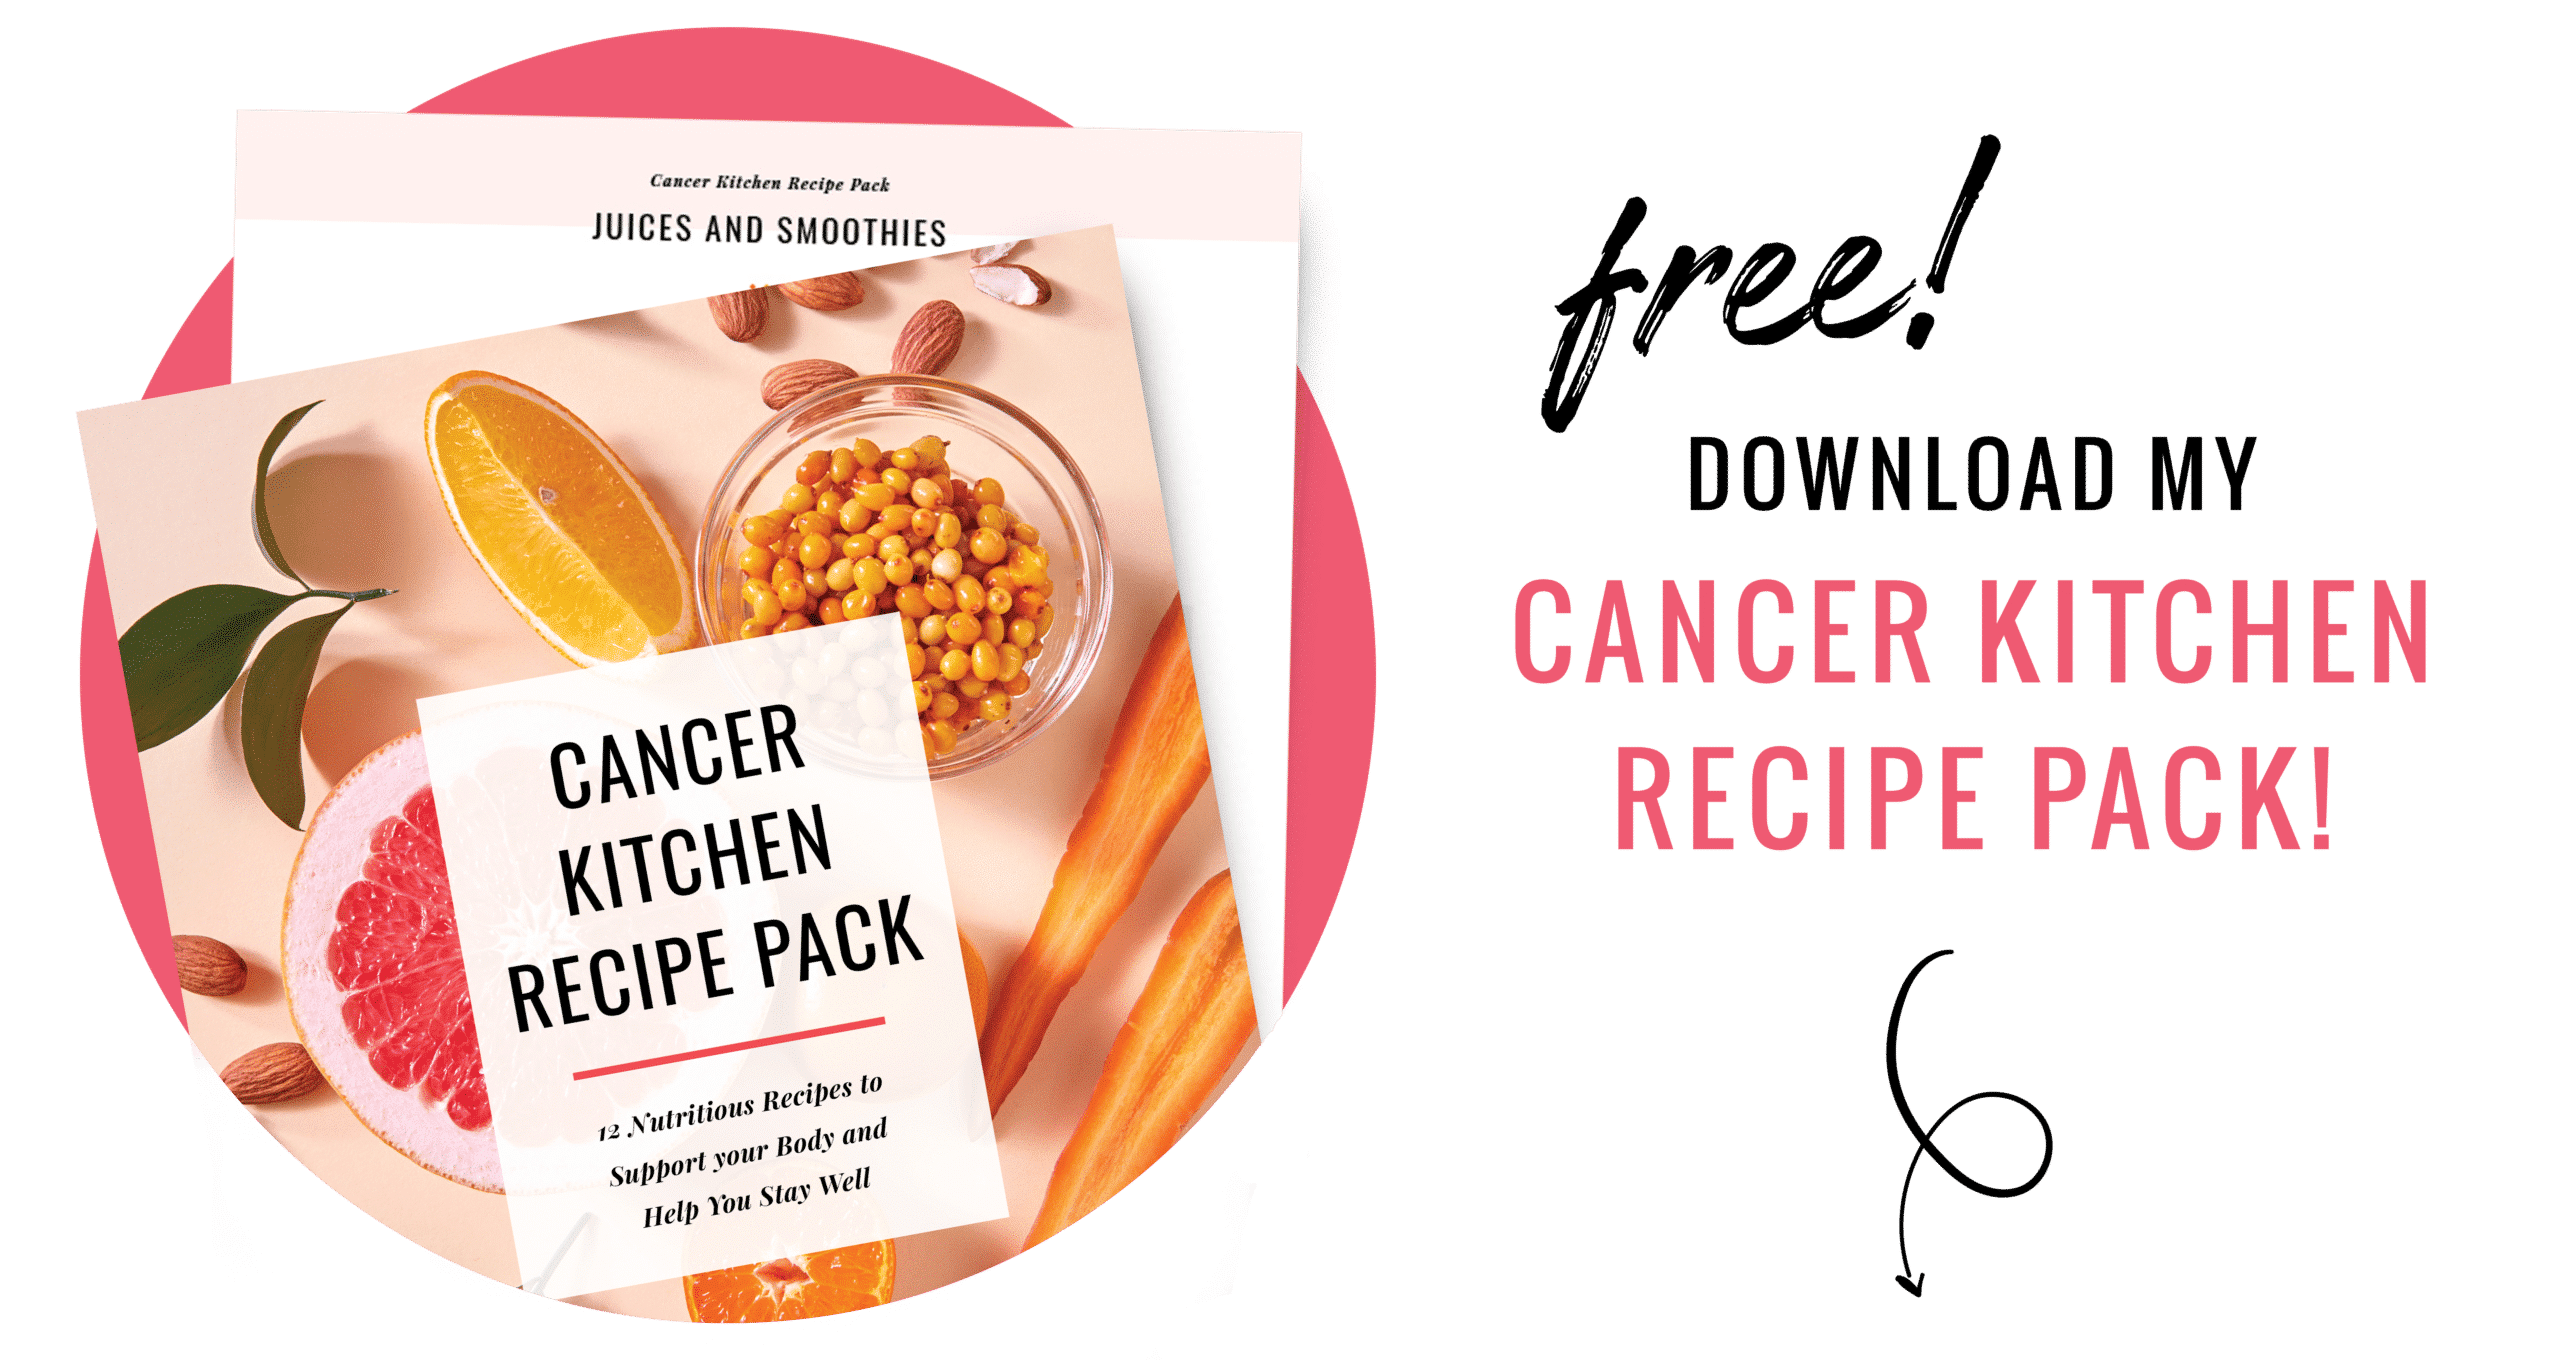 Get your Cancer Kitchen Recipes Pack